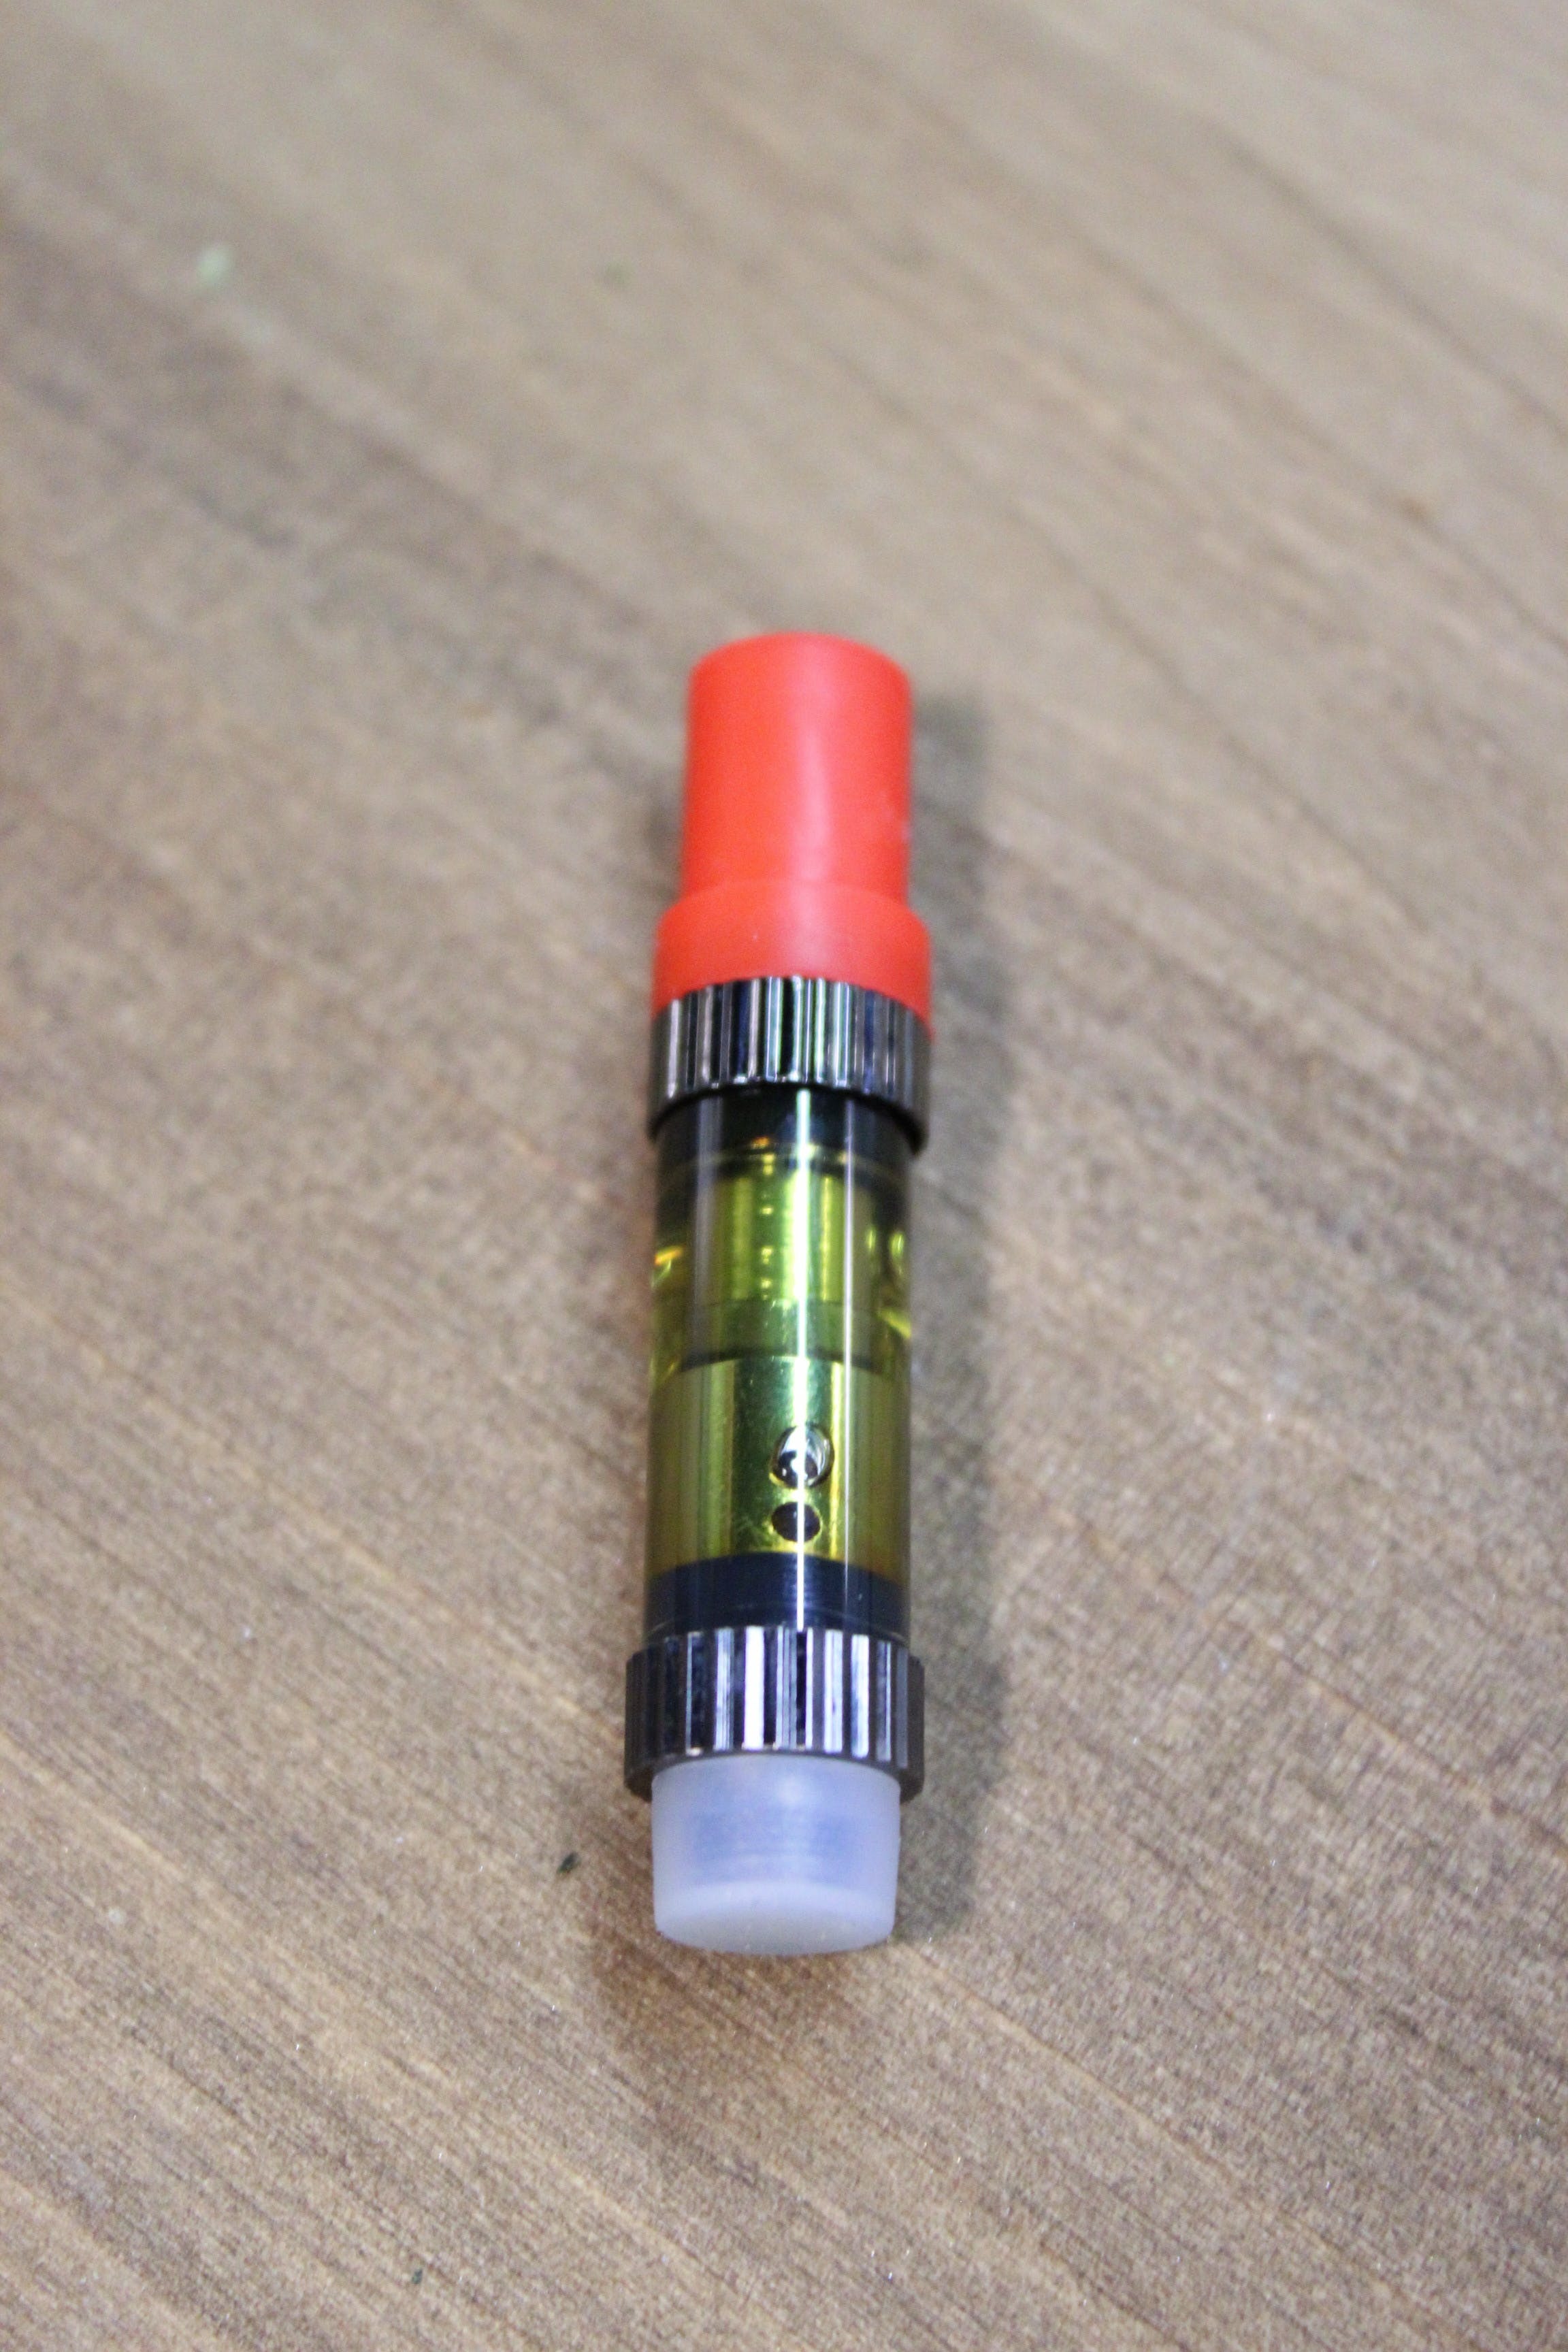 concentrate-5g-vape-cartridge-indica-dominant